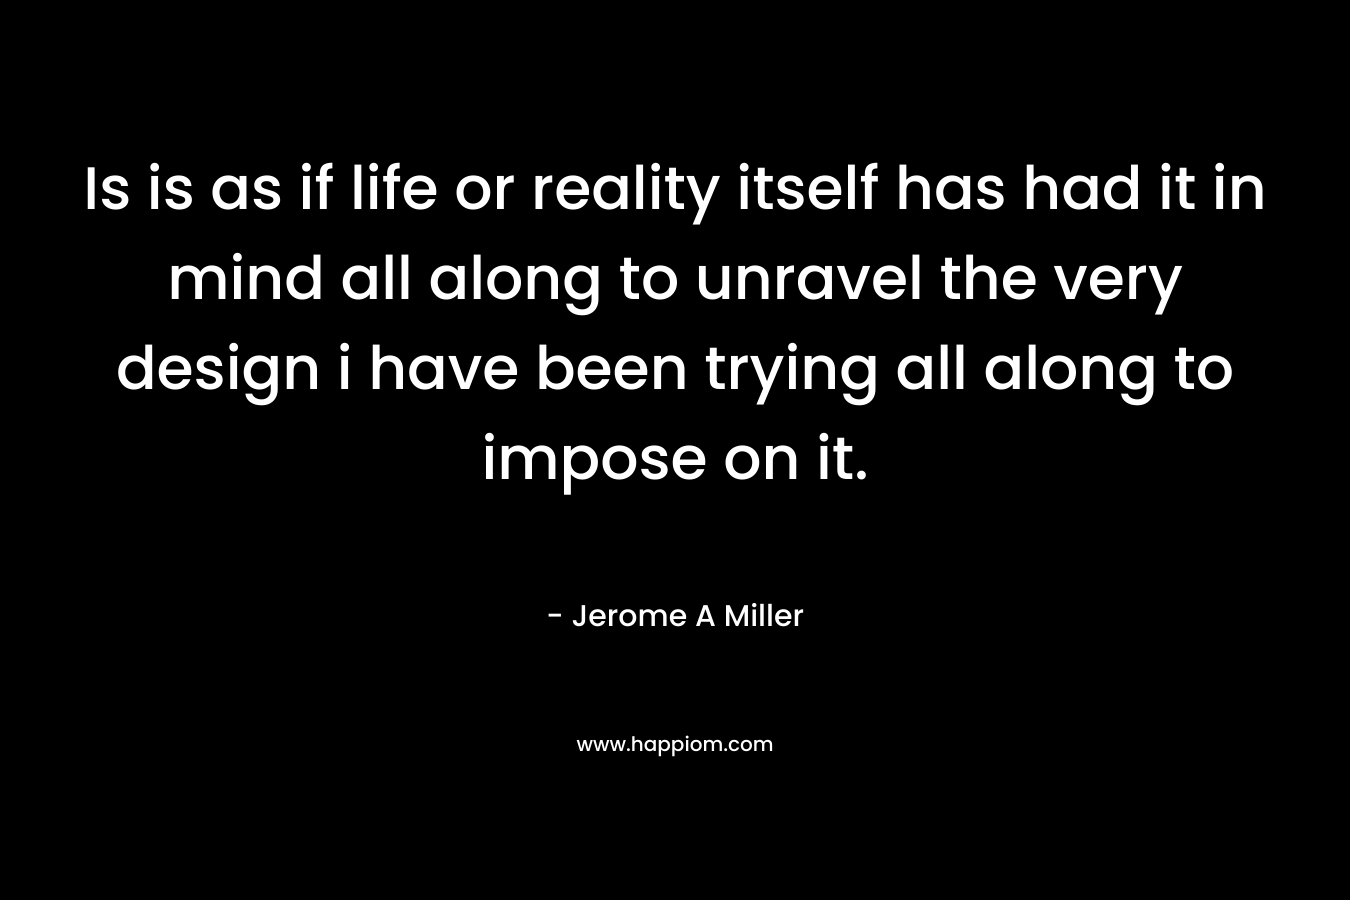 Is is as if life or reality itself has had it in mind all along to unravel the very design i have been trying all along to impose on it. – Jerome A Miller